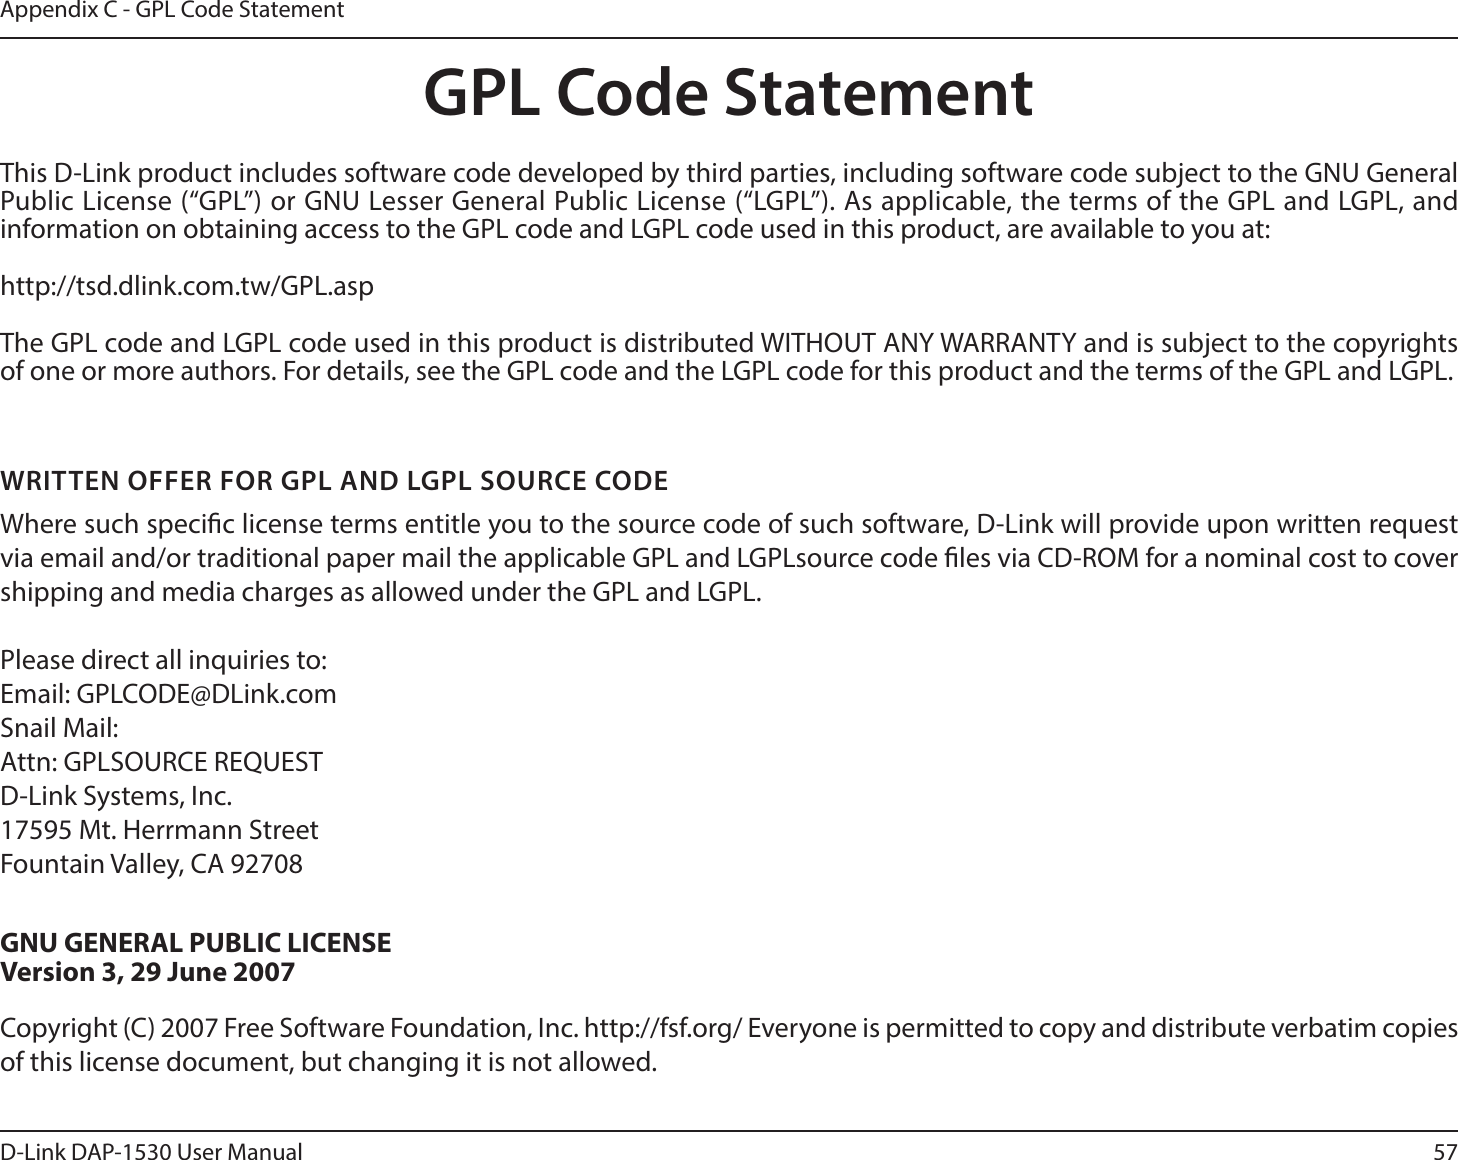 57D-Link DAP-1530 User ManualAppendix C - GPL Code StatementGPL Code StatementThis D-Link product includes software code developed by third parties, including software code subject to the GNU General Public License (“GPL”) or GNU Lesser General Public License (“LGPL”). As applicable, the terms of the GPL and LGPL, and information on obtaining access to the GPL code and LGPL code used in this product, are available to you at:http://tsd.dlink.com.tw/GPL.aspThe GPL code and LGPL code used in this product is distributed WITHOUT ANY WARRANTY and is subject to the copyrights of one or more authors. For details, see the GPL code and the LGPL code for this product and the terms of the GPL and LGPL.WRITTEN OFFER FOR GPL AND LGPL SOURCE CODEWhere such specic license terms entitle you to the source code of such software, D-Link will provide upon written request via email and/or traditional paper mail the applicable GPL and LGPLsource code les via CD-ROM for a nominal cost to cover shipping and media charges as allowed under the GPL and LGPL. Please direct all inquiries to:Email: GPLCODE@DLink.comSnail Mail:Attn: GPLSOURCE REQUESTD-Link Systems, Inc.17595 Mt. Herrmann StreetFountain Valley, CA 92708GNU GENERAL PUBLIC LICENSEVersion 3, 29 June 2007Copyright (C) 2007 Free Software Foundation, Inc. http://fsf.org/ Everyone is permitted to copy and distribute verbatim copies of this license document, but changing it is not allowed.